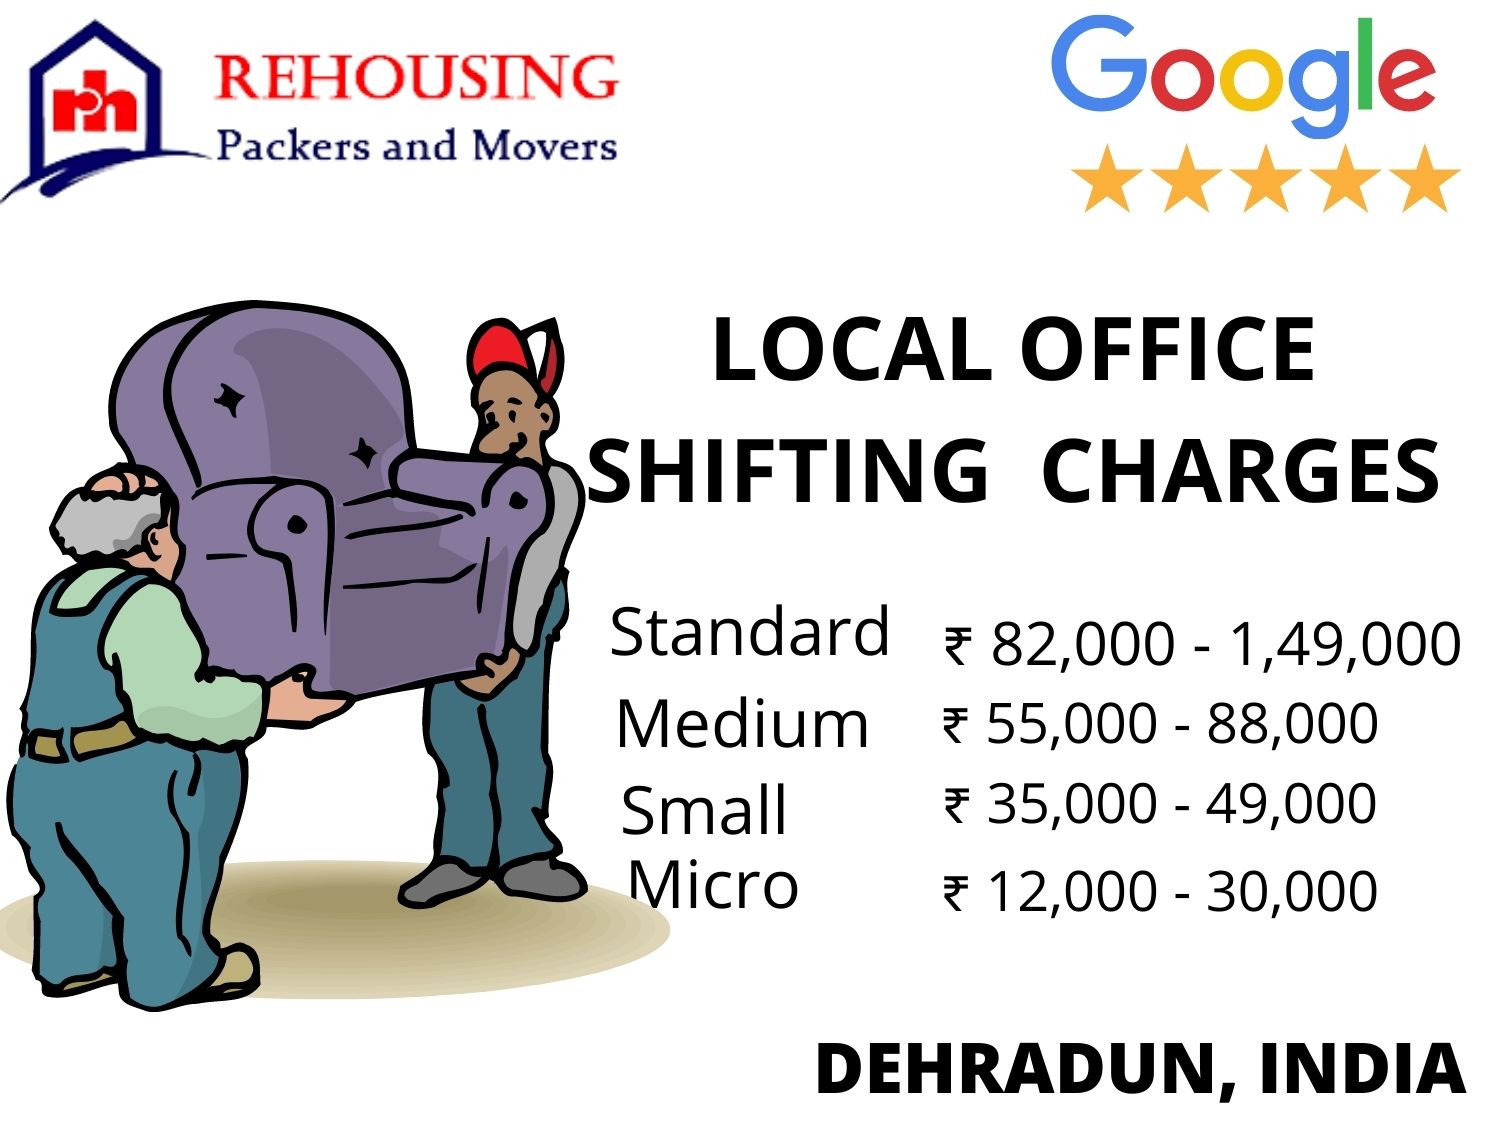 moving packers and movers charges in Dehradun range from Rs. 3,000 to Rs. 52,000